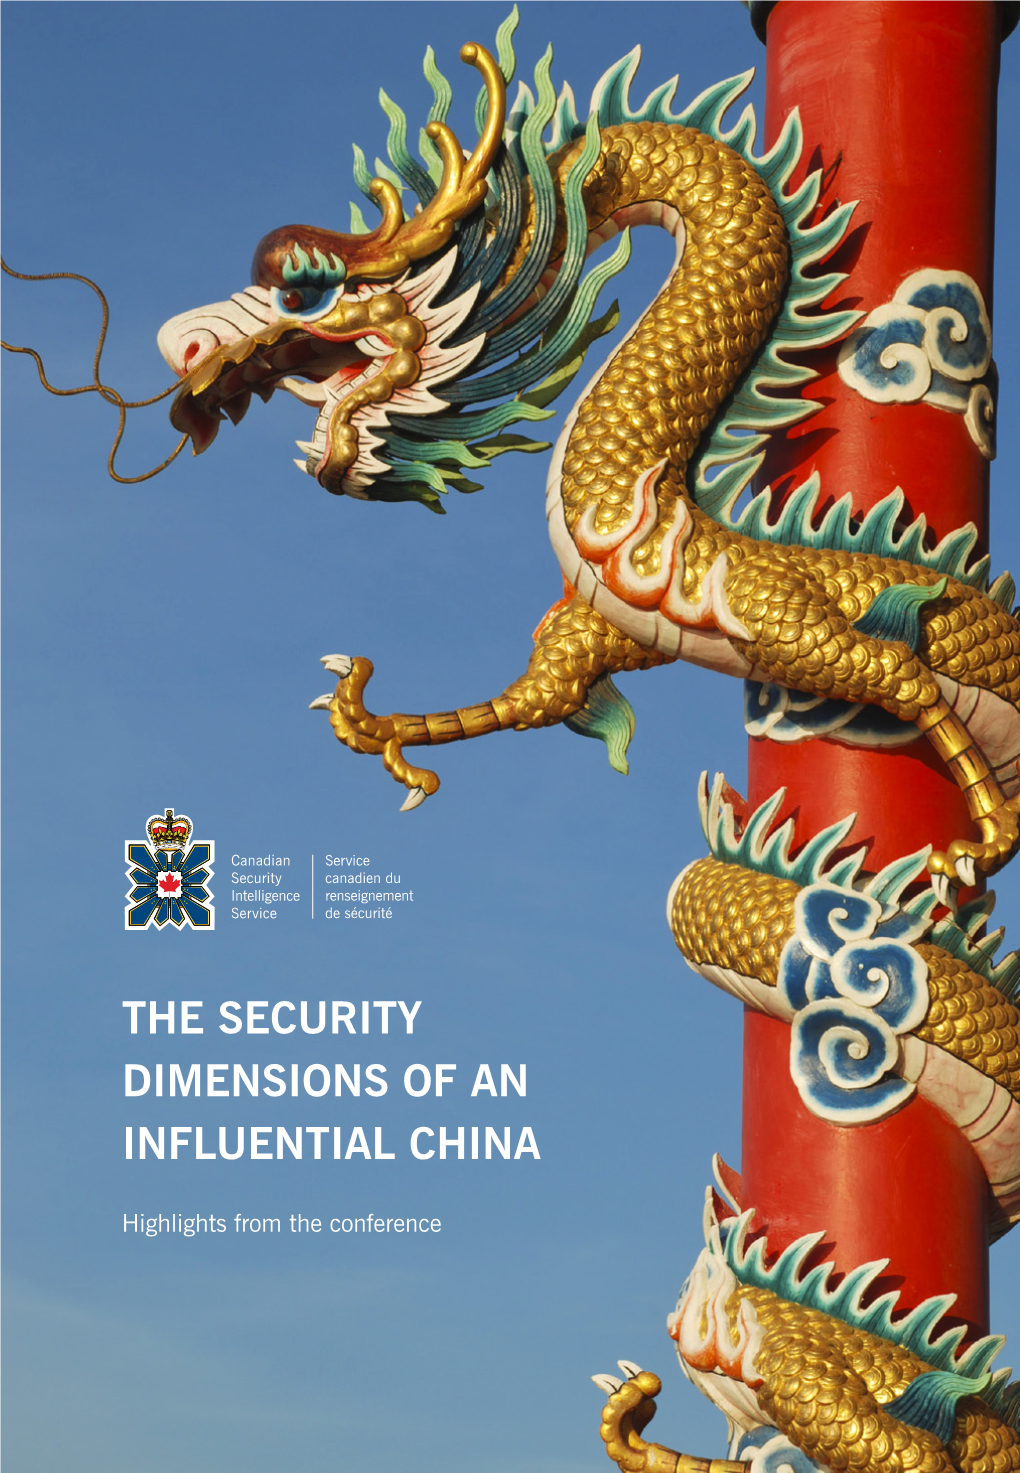 The Security Dimensions of an Influential China